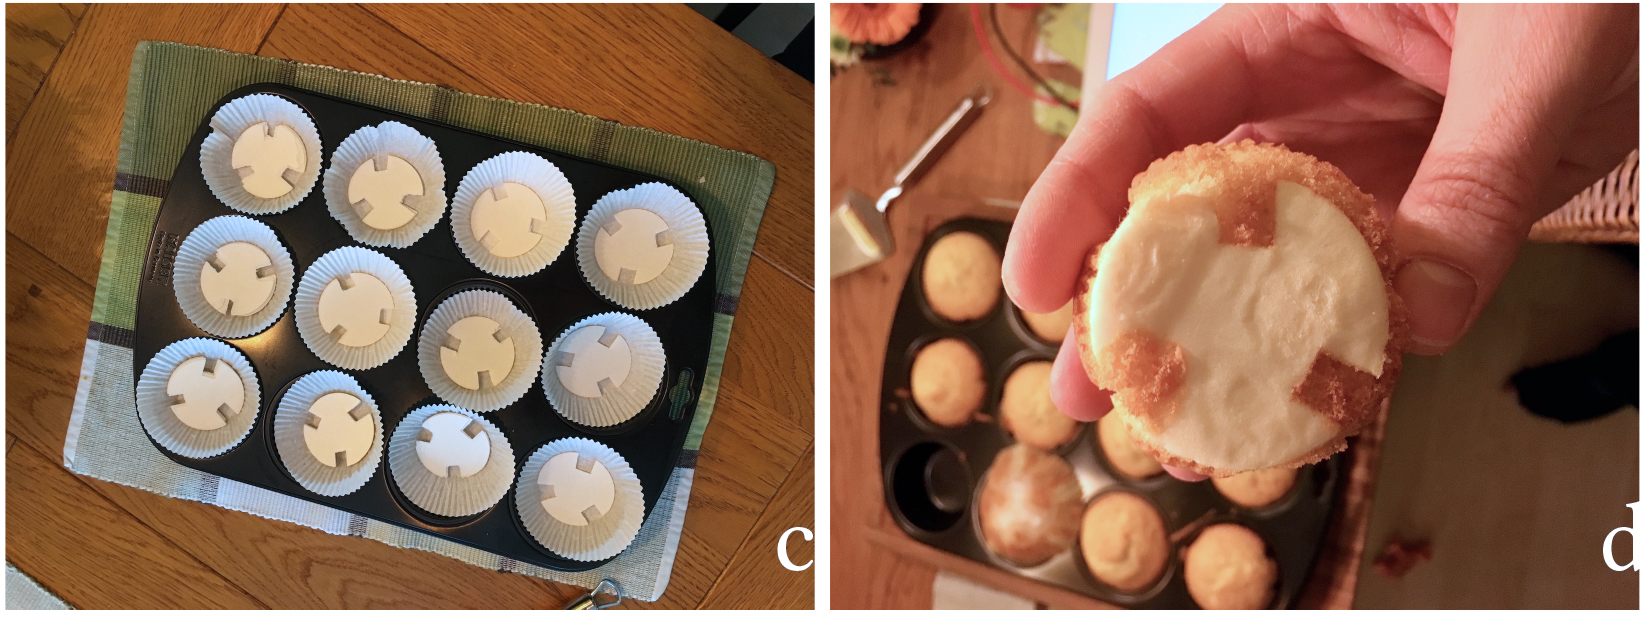 The Most Important Research Ever Conducted Finds that Touchscreens Can Detect Baked Goods